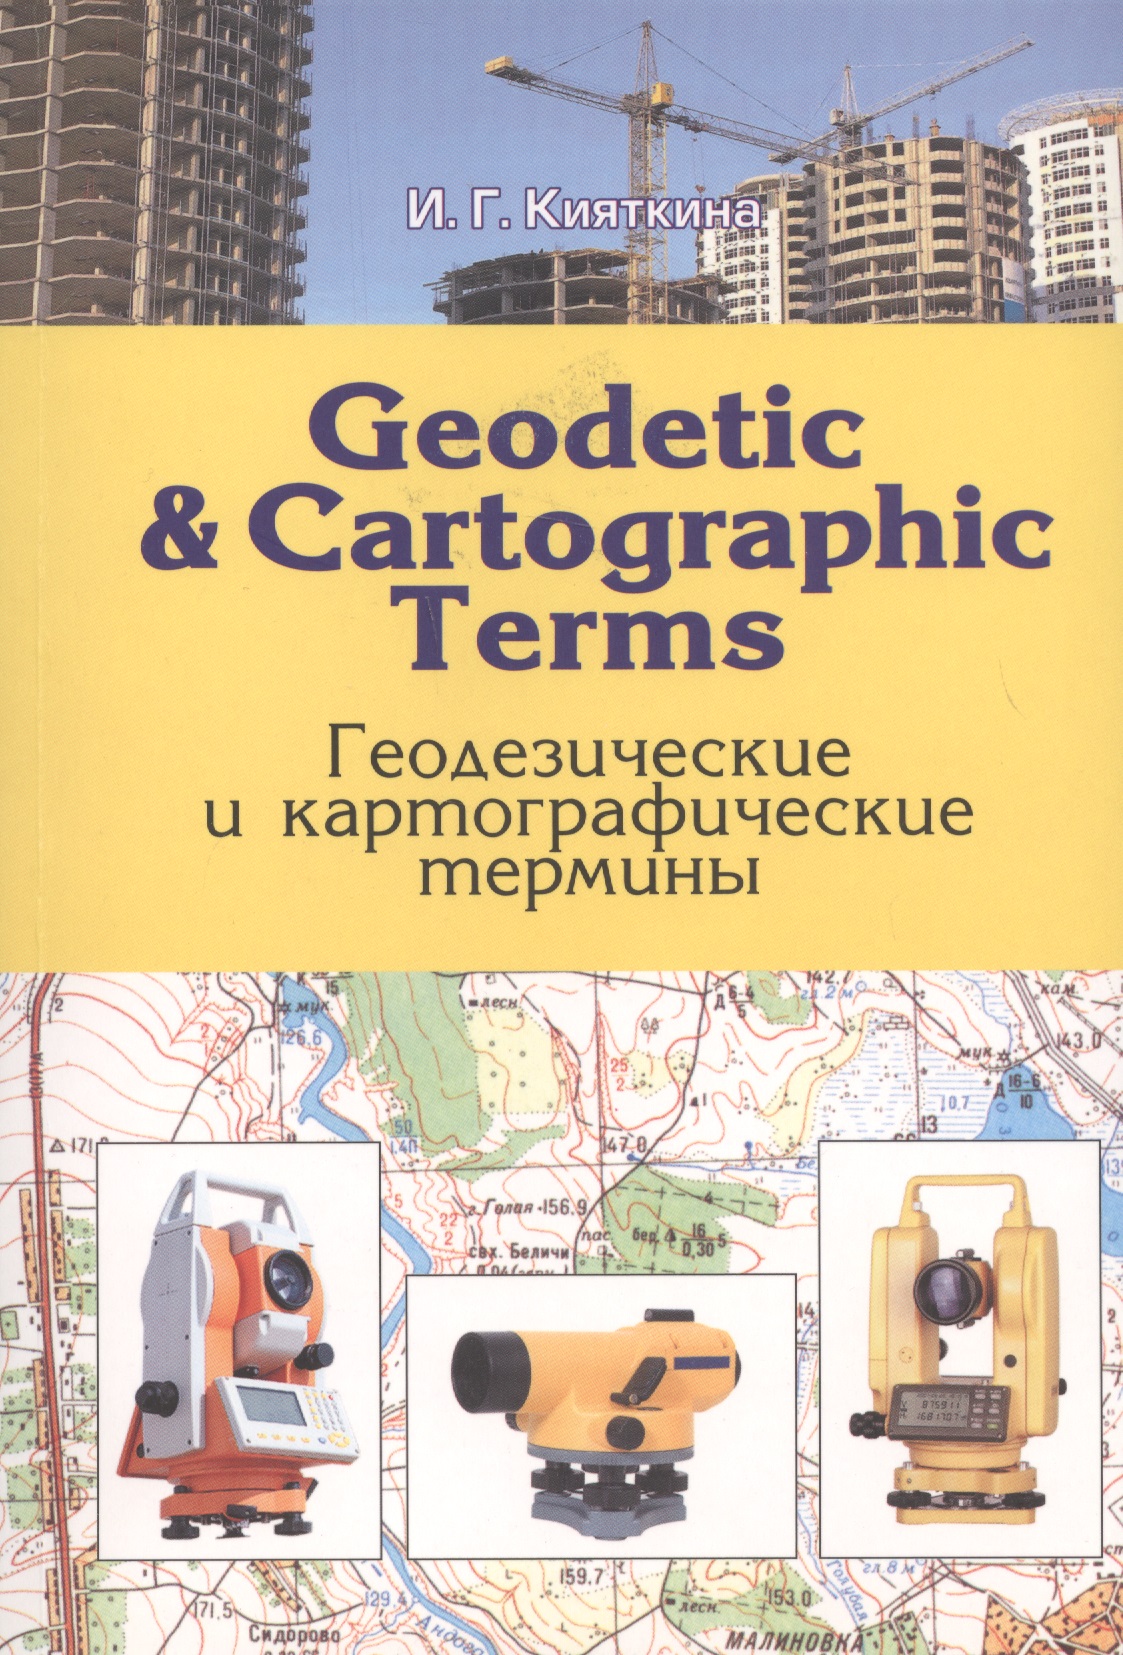 Geodetic & cartographic terms -  